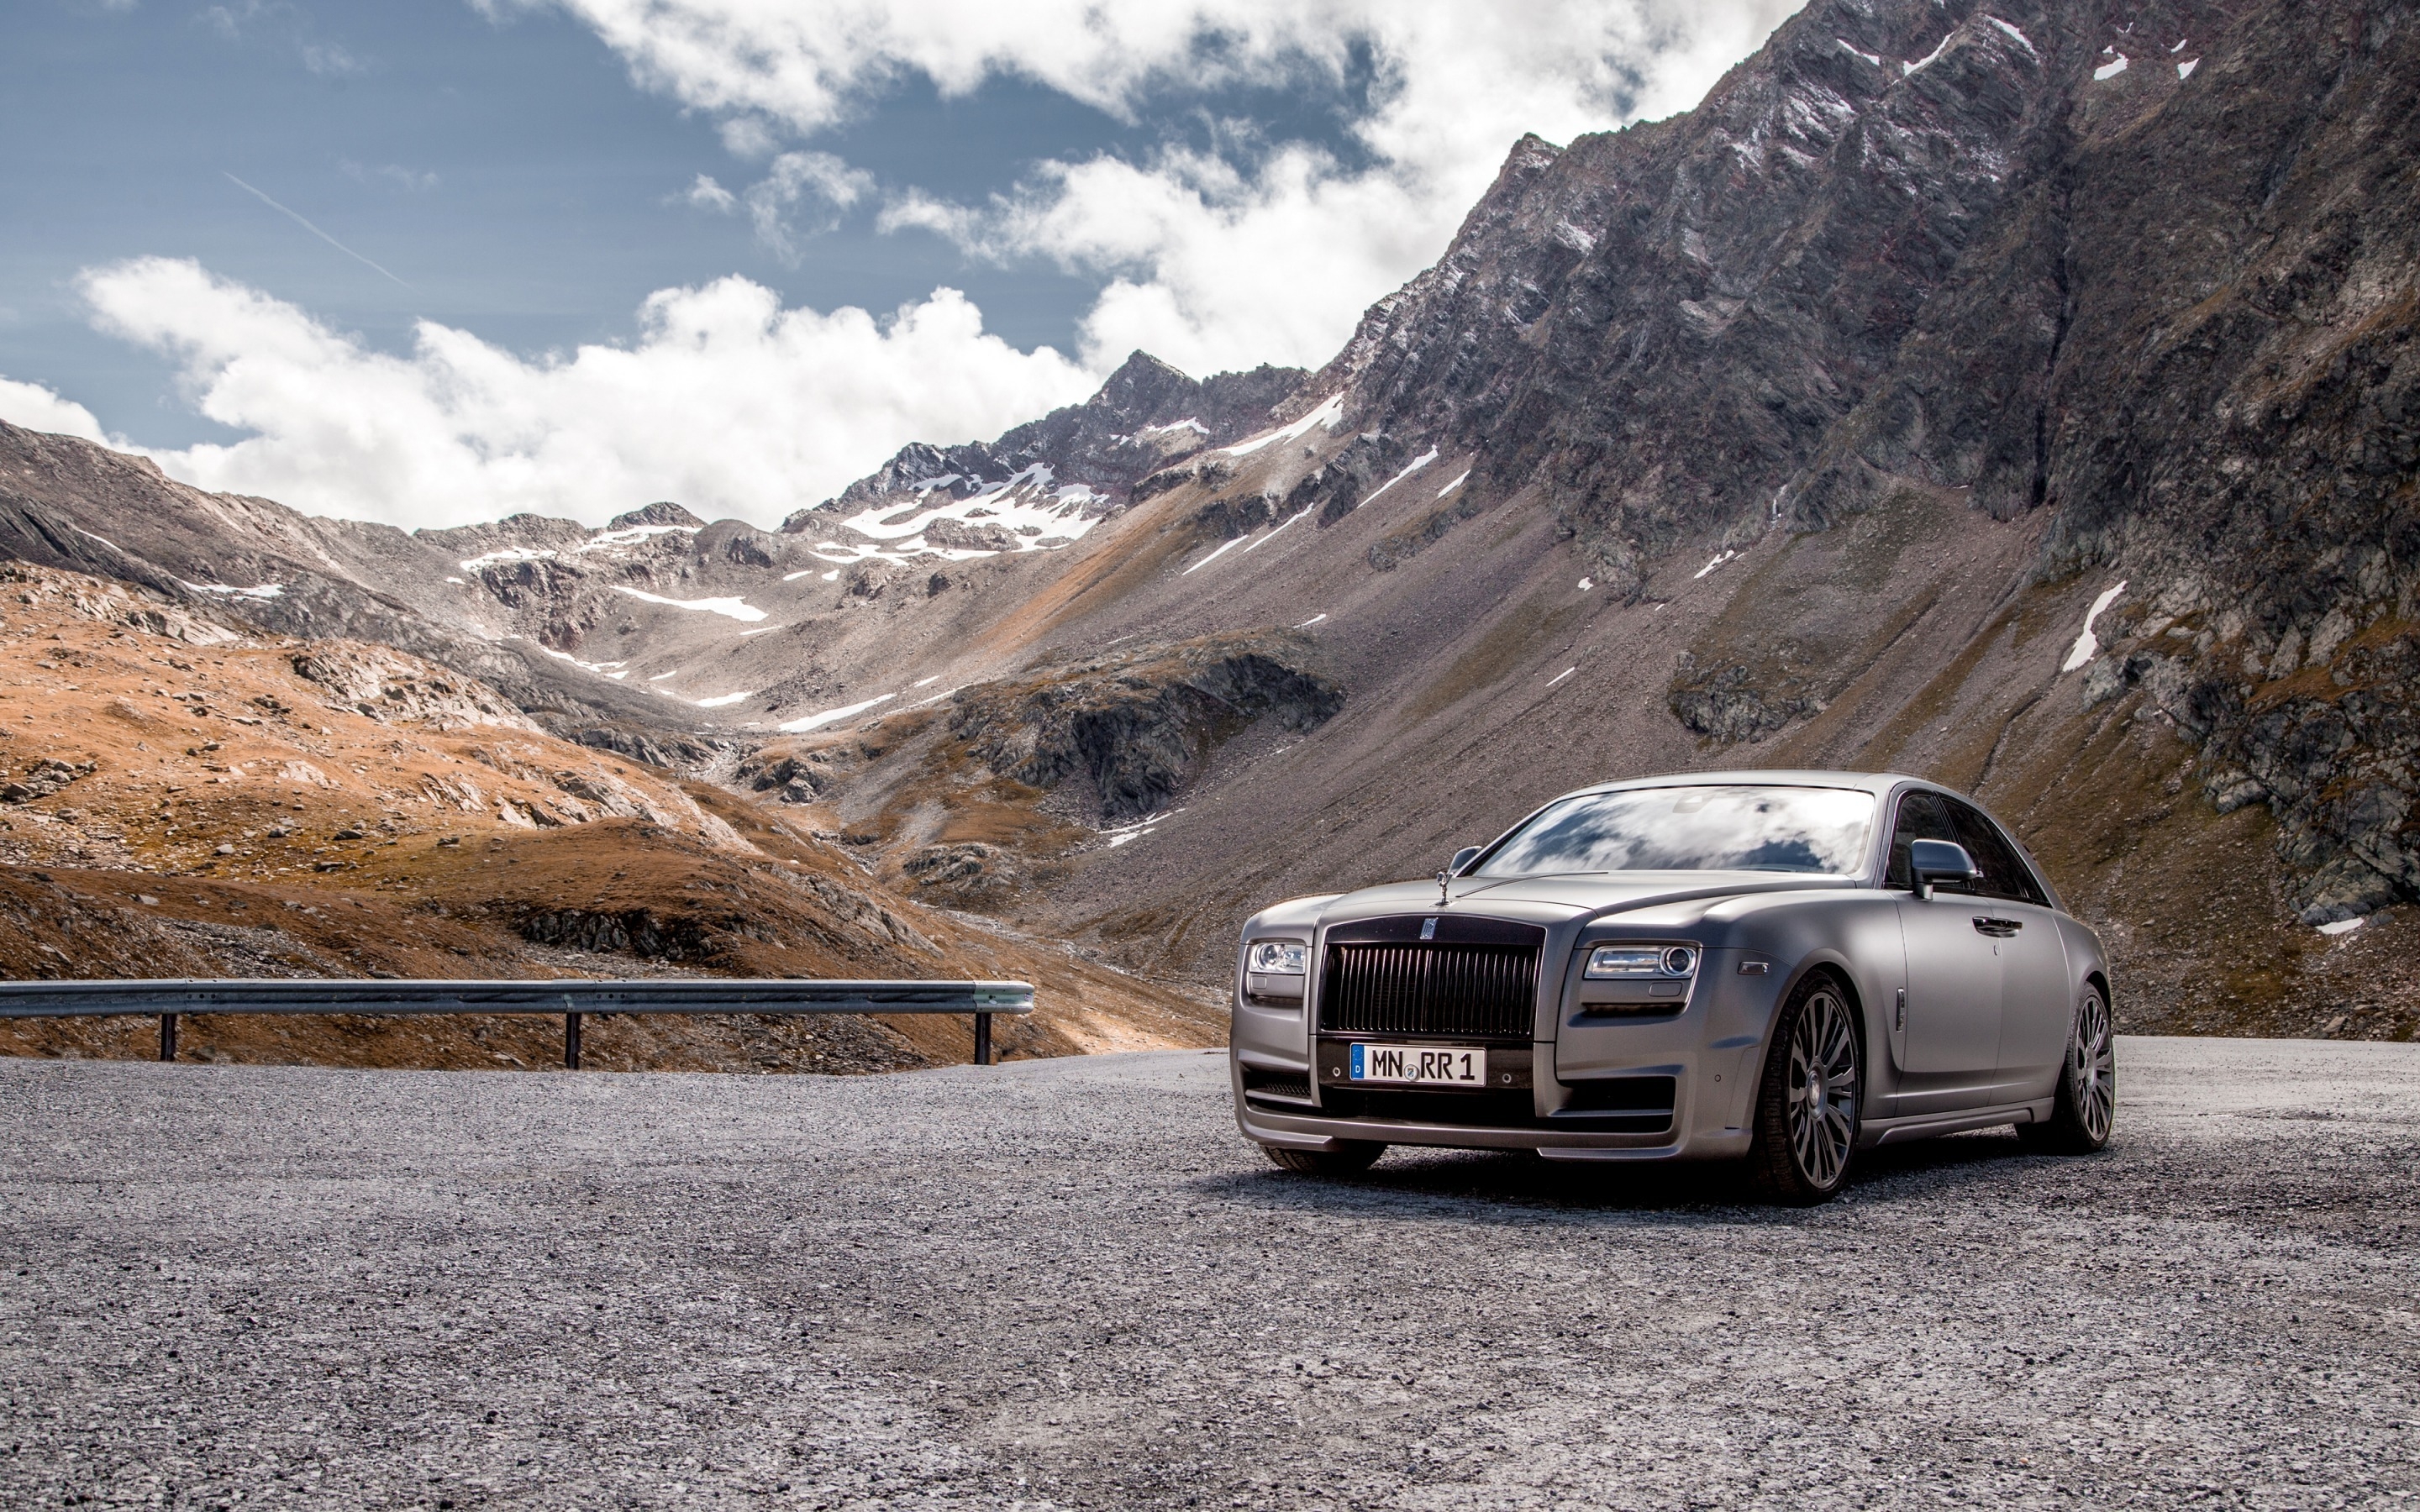 Gorgeous Rolls-Royce Ghost for 2880 x 1800 Retina Display resolution